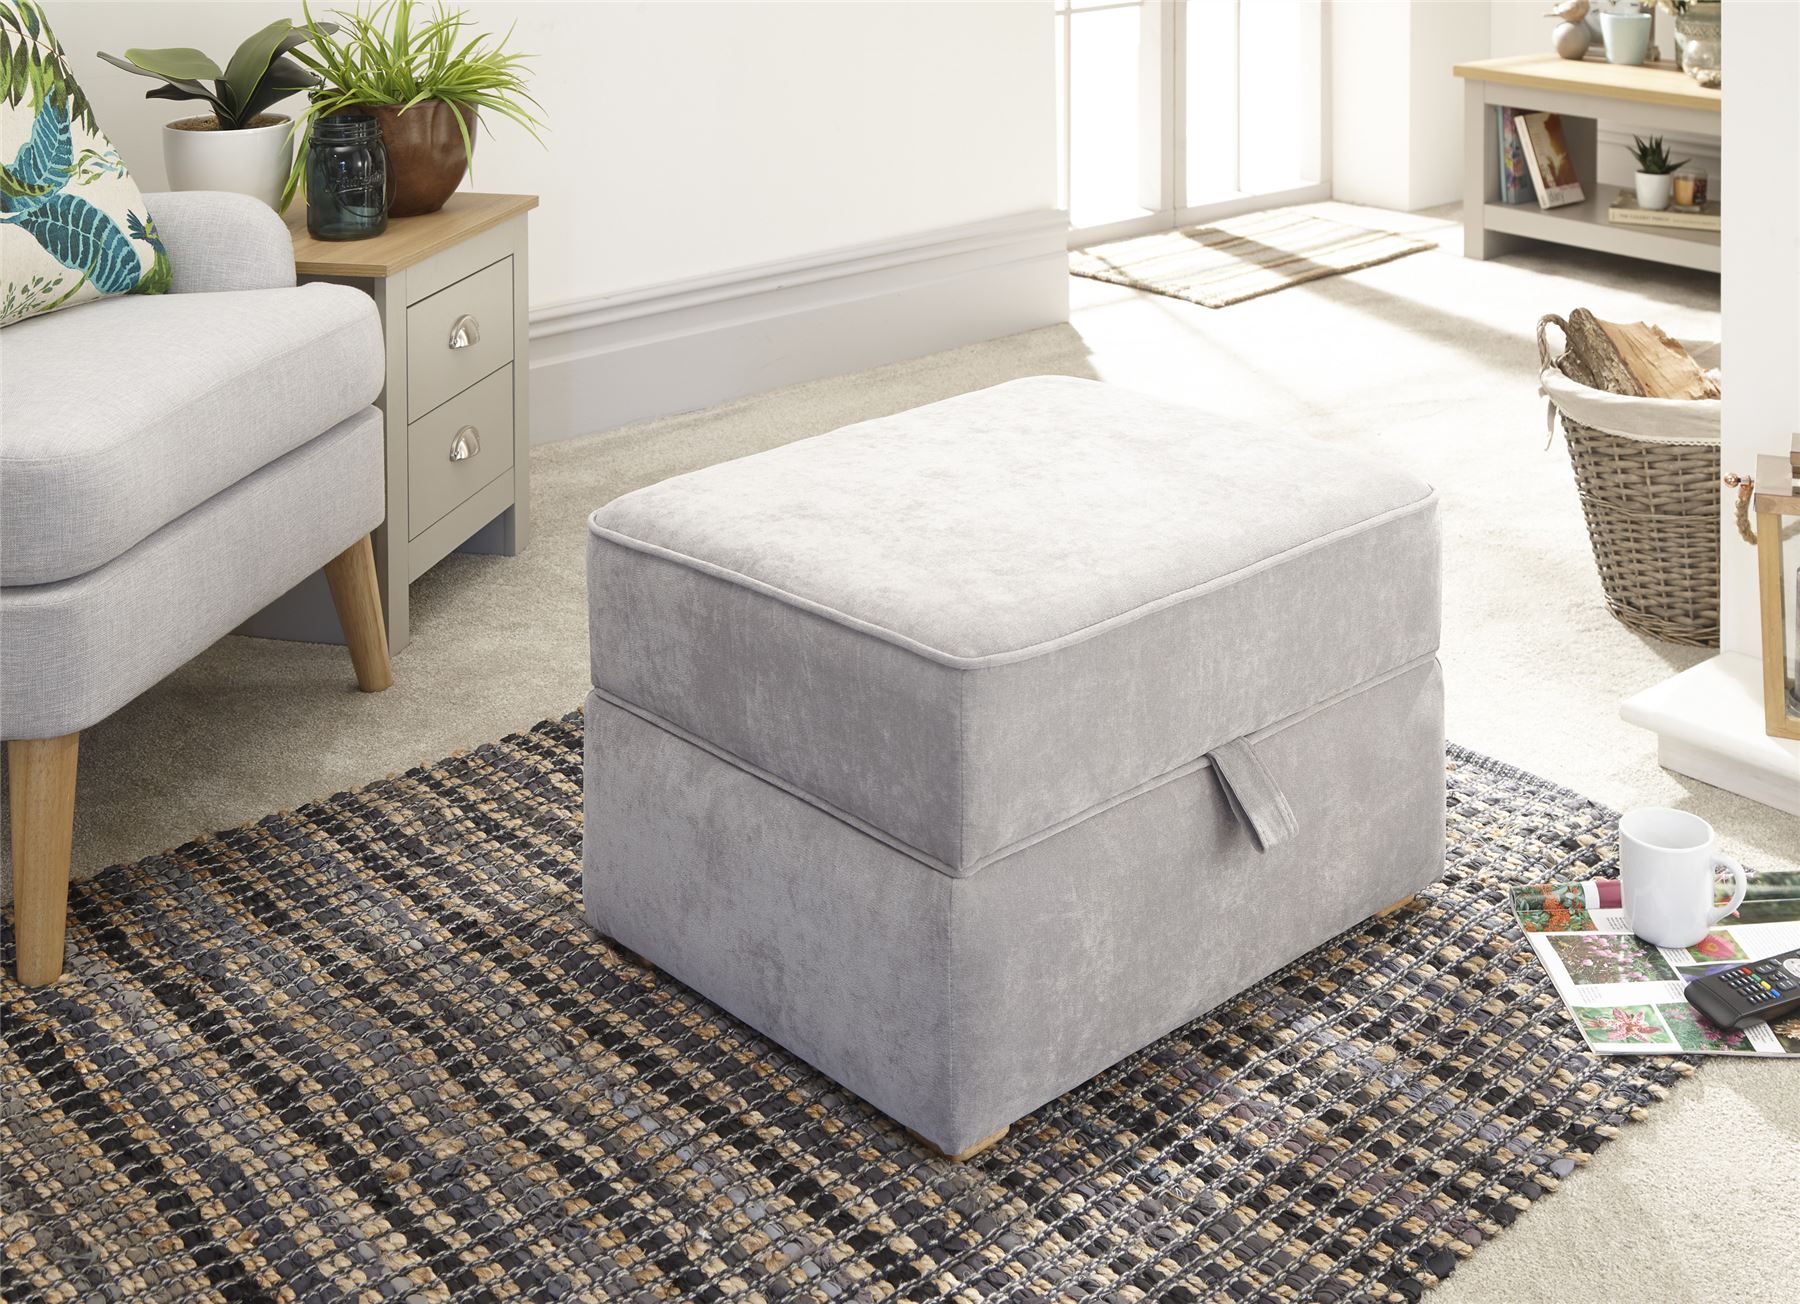 Dauphine Square Ottoman Storage Blanket Box Footstool Fabric Hopsack With Regard To Natural Fabric Square Ottomans (View 1 of 20)